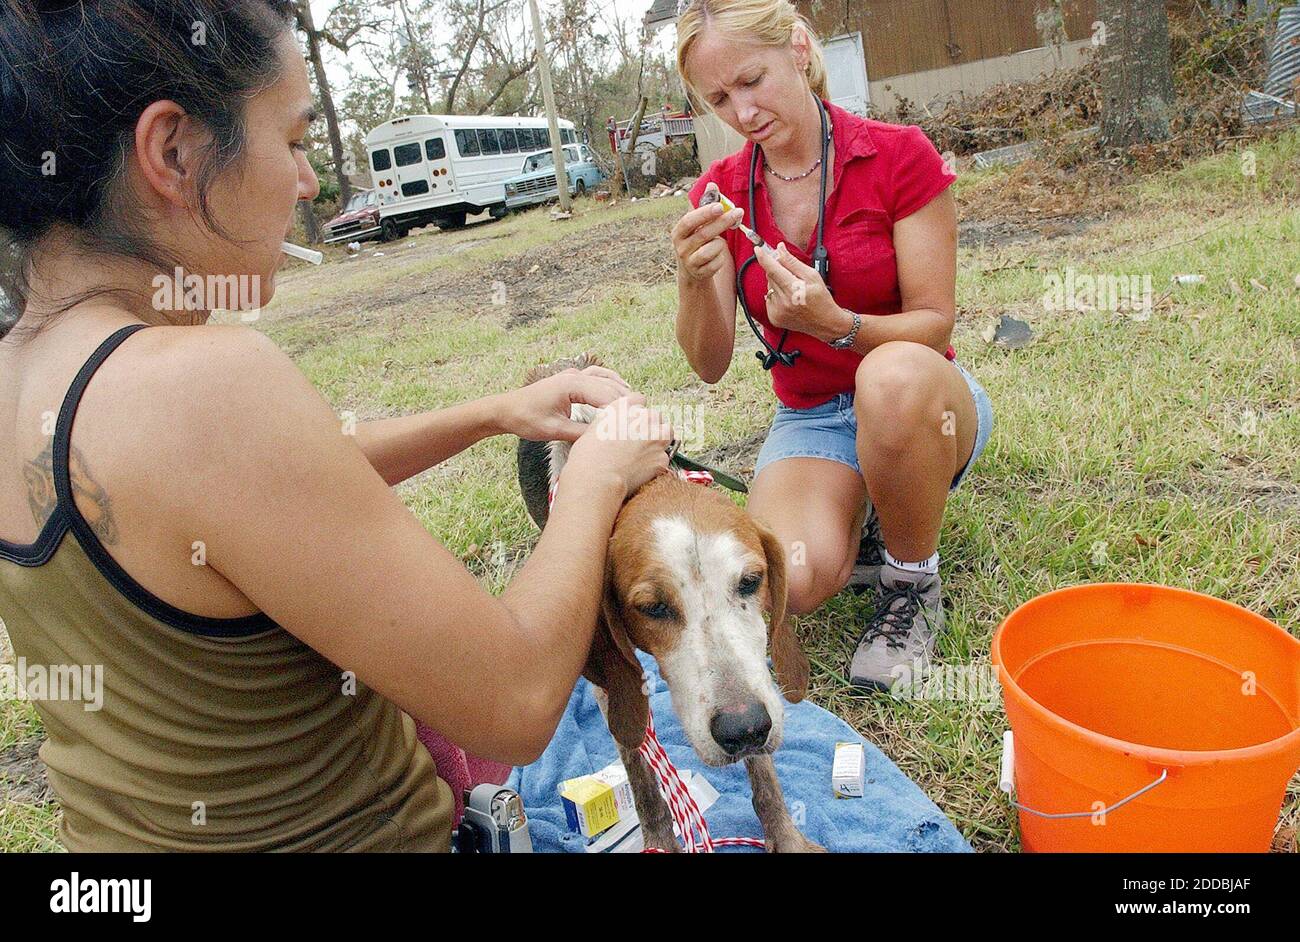 NO FILM, NO VIDEO, NO TV, NO DOCUMENTARY - Volunteer veterinarian Dr. Anne Scholl, right, and her assistant Yady Avila, who drove from Orlando, Florida, to aid in recovery efforts in the wake of Hurricane Katrina, administer antibiotics and pain medication to a dog that was found by a rescue worker Friday afternoon, Sept. 9, 2005, in Slidell, Mississippi. Photo by Brian Blanco/Biloxi Sun Herald/KRT/ABACAPRESS.COM Stock Photo